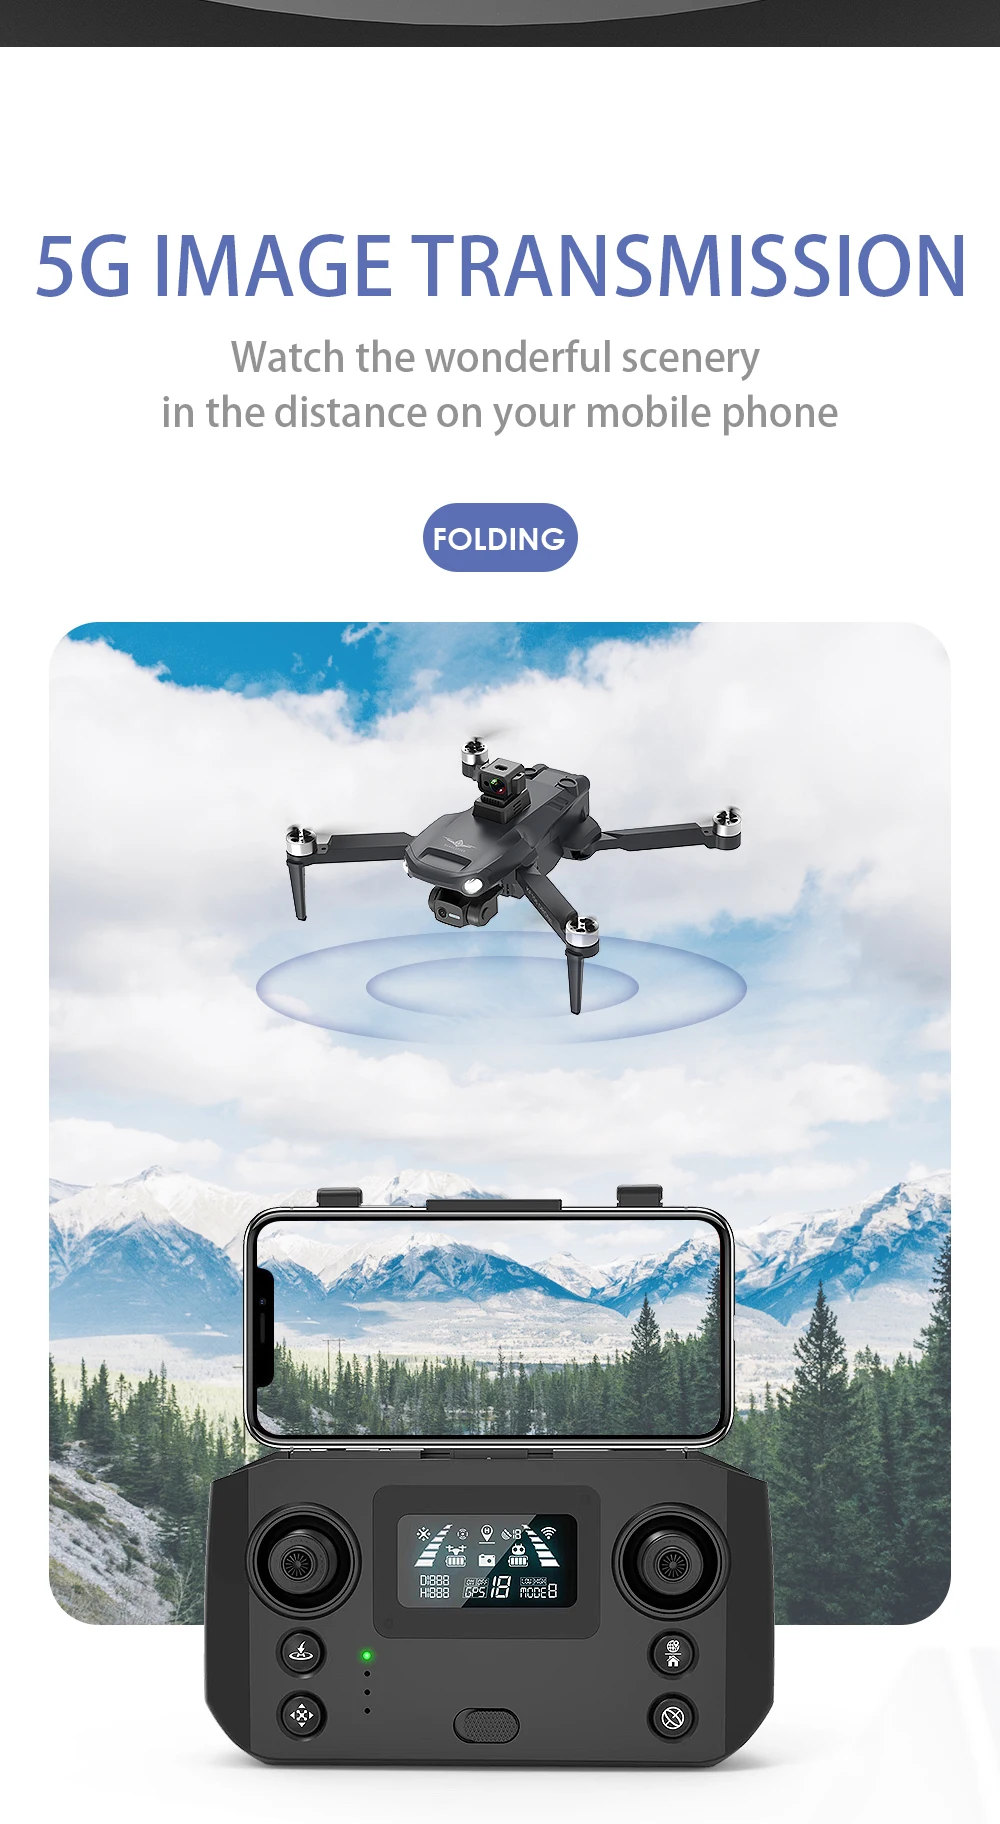 KFPLAN KF106 Drone, 58 IMAGE TRANSMISSION Watch the wonderful scenery in the distance on your mobile